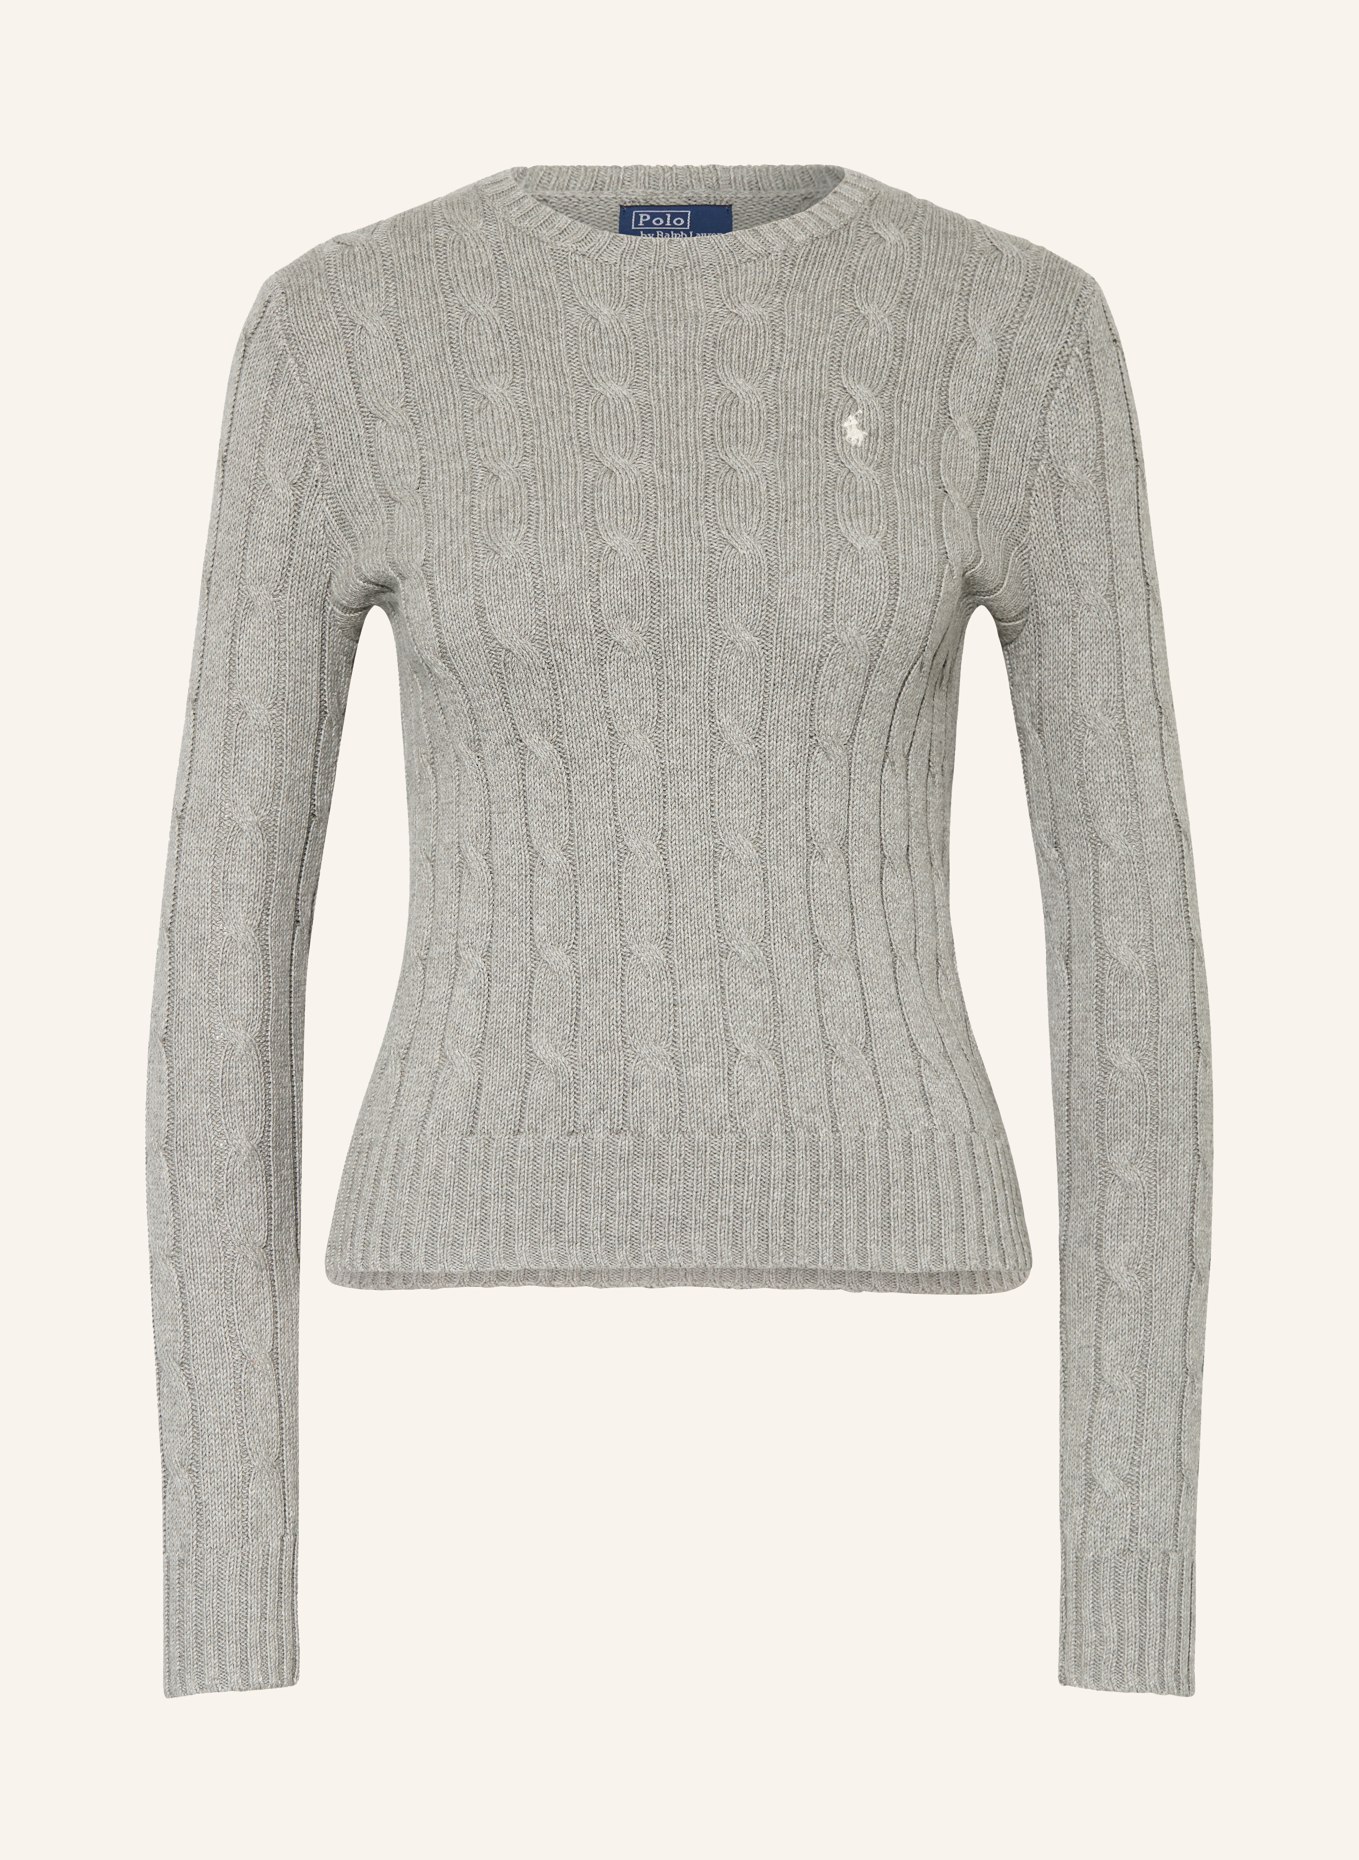 POLO RALPH LAUREN Sweater, Color: GRAY (Image 1)